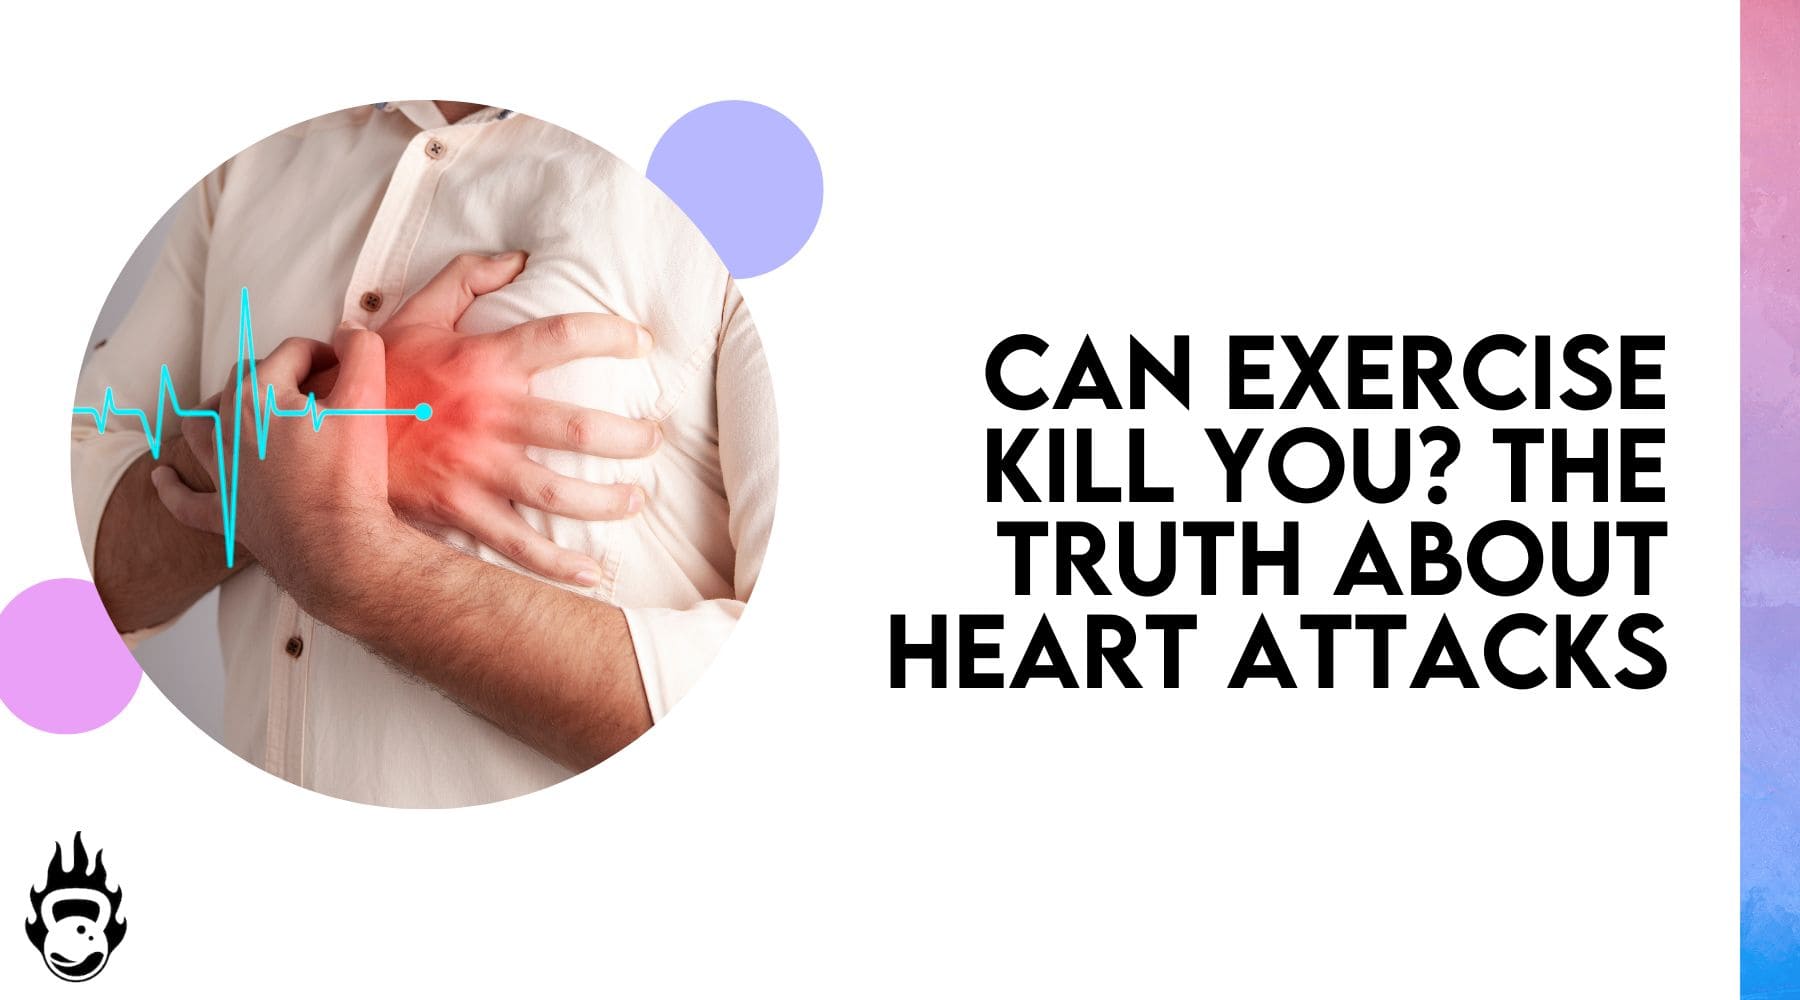 Can Exercise Kill You? The Truth About Heart Attacks